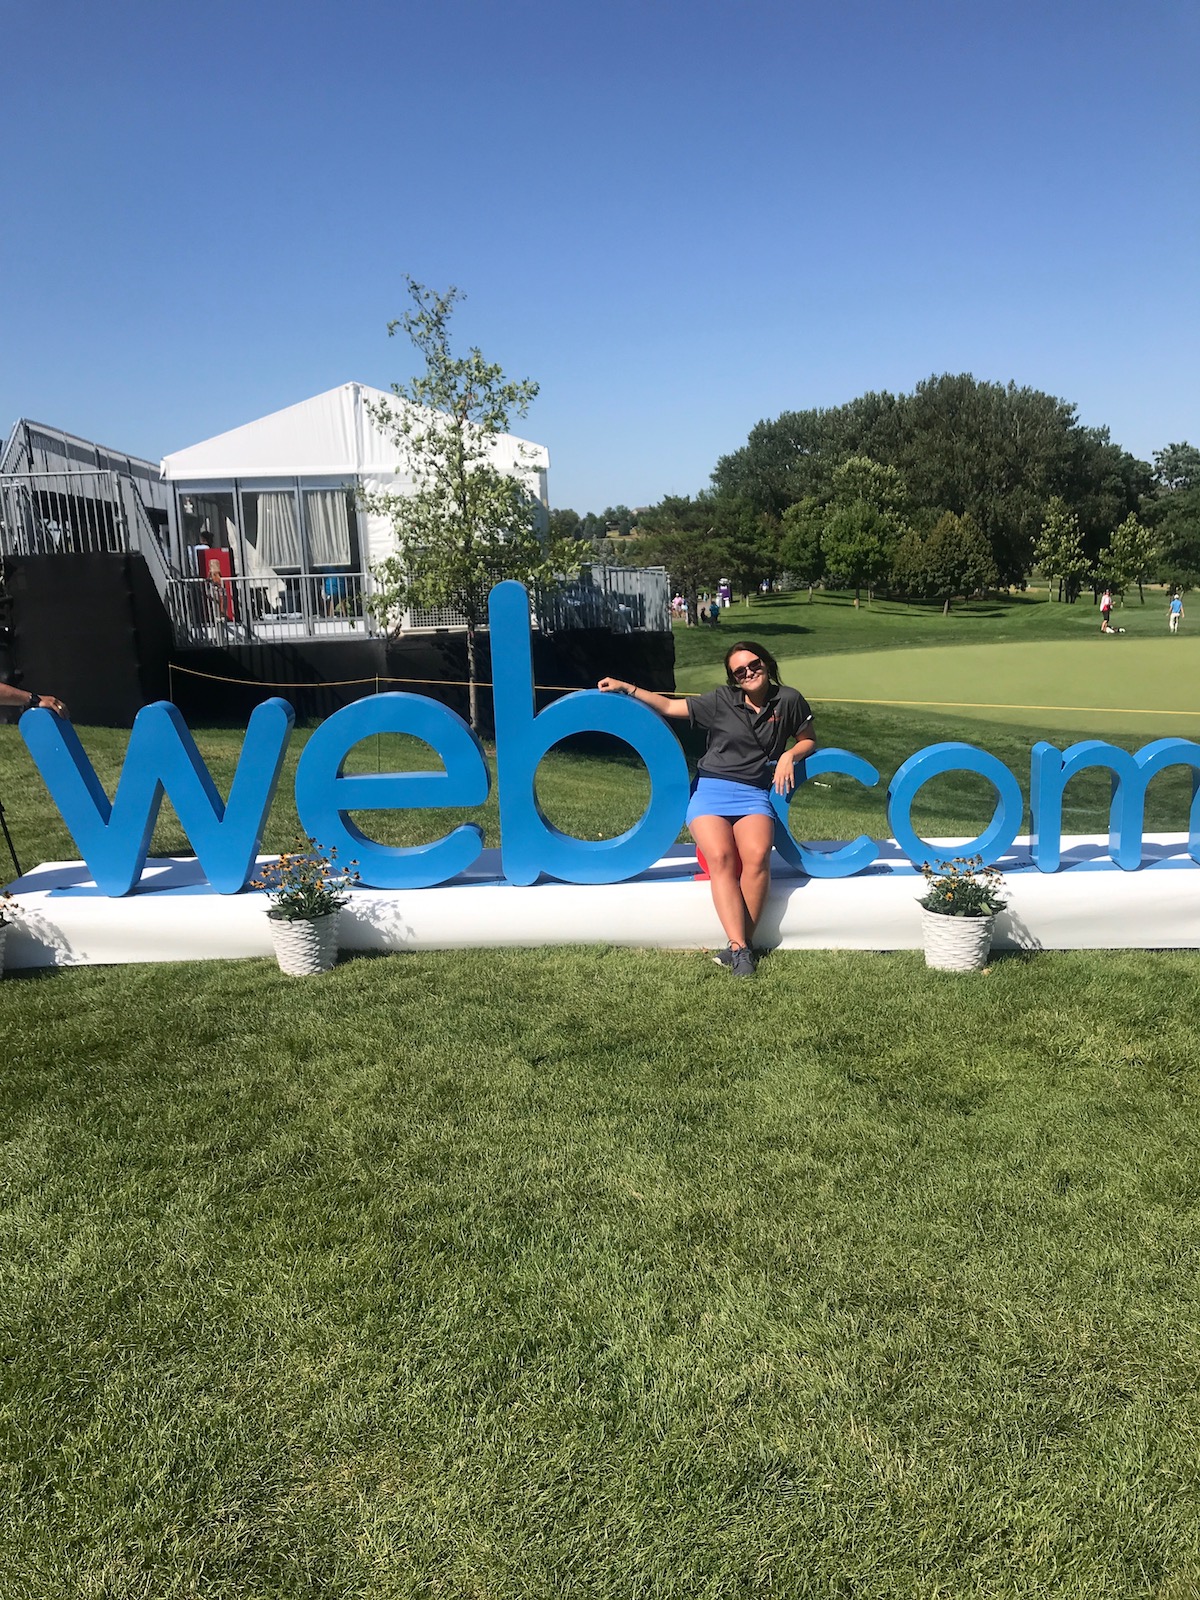 Logan John takes a break from working at the Pinnacle Bank Championship Golf Tournament, one of Hurrdat’s clients, to pose with a statue of one of the sponsors, web.com. (Photo by Reilly Nelson)